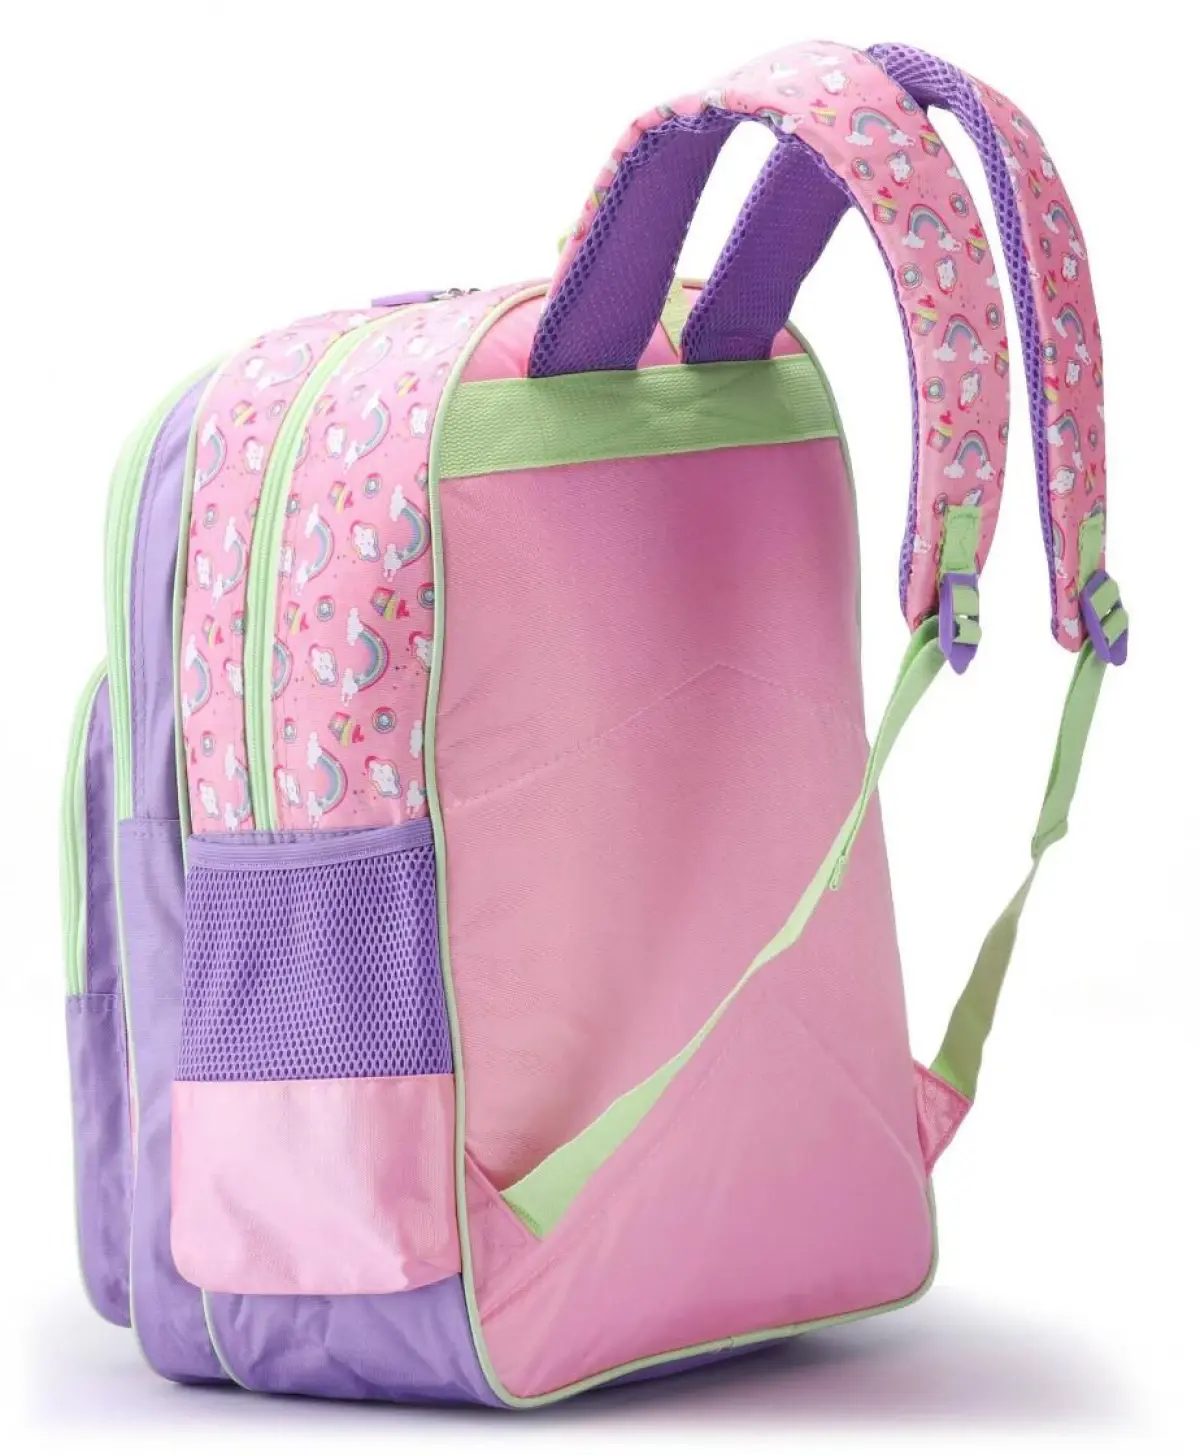 Striders 16 inches Barbie School Bag Dreams in Style for Little Fashionistas Multicolor For Kids Ages 6Y+